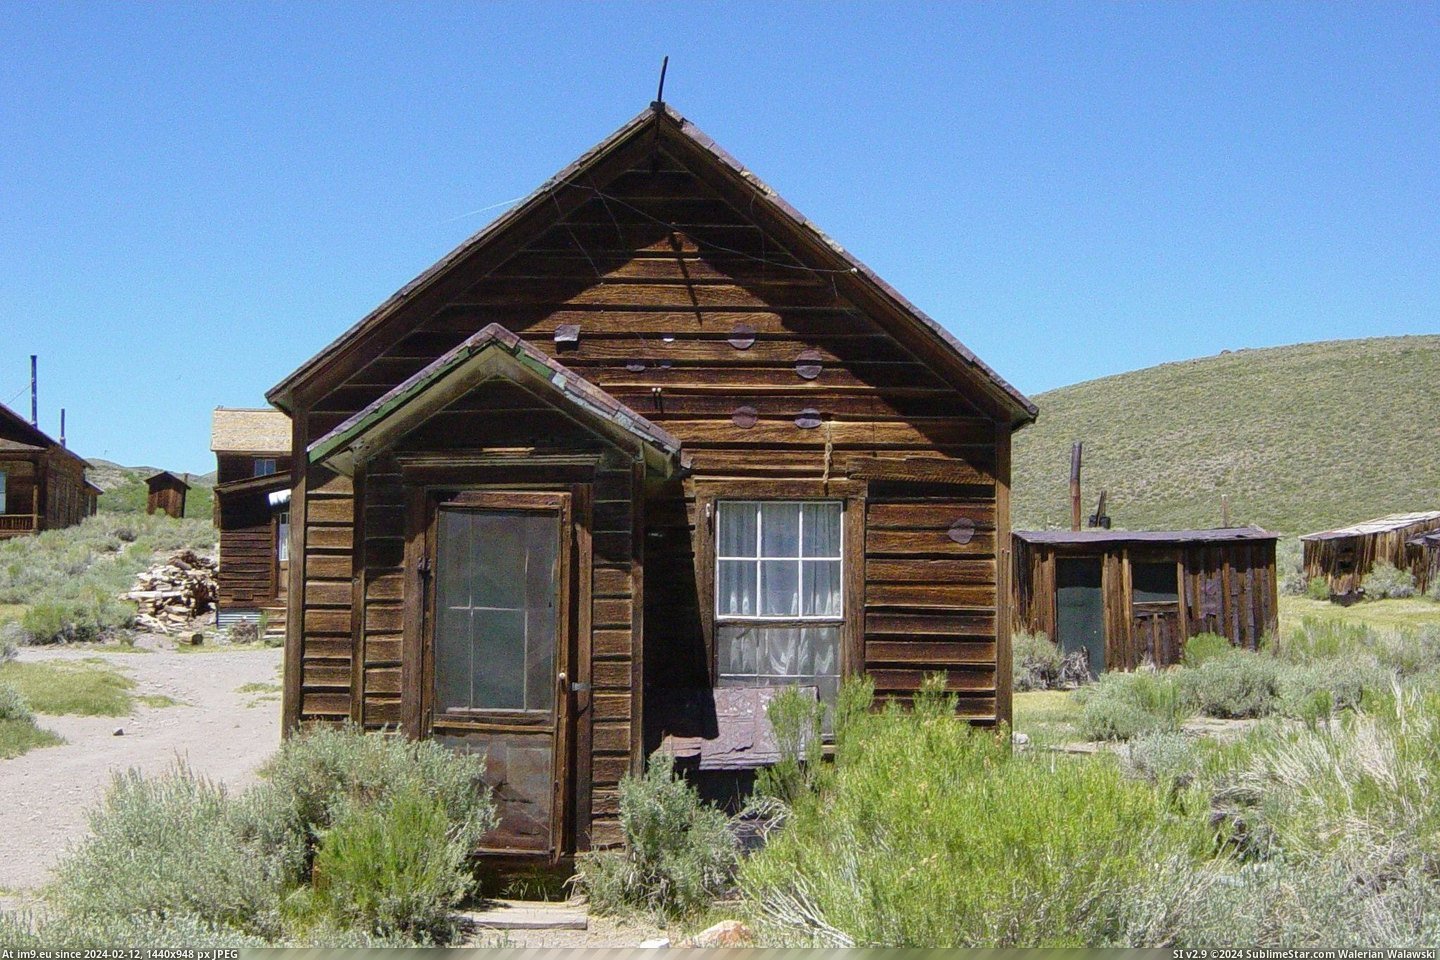 #California #Bodie #Cody #House Cody House In Bodie, California Pic. (Изображение из альбом Bodie - a ghost town in Eastern California))